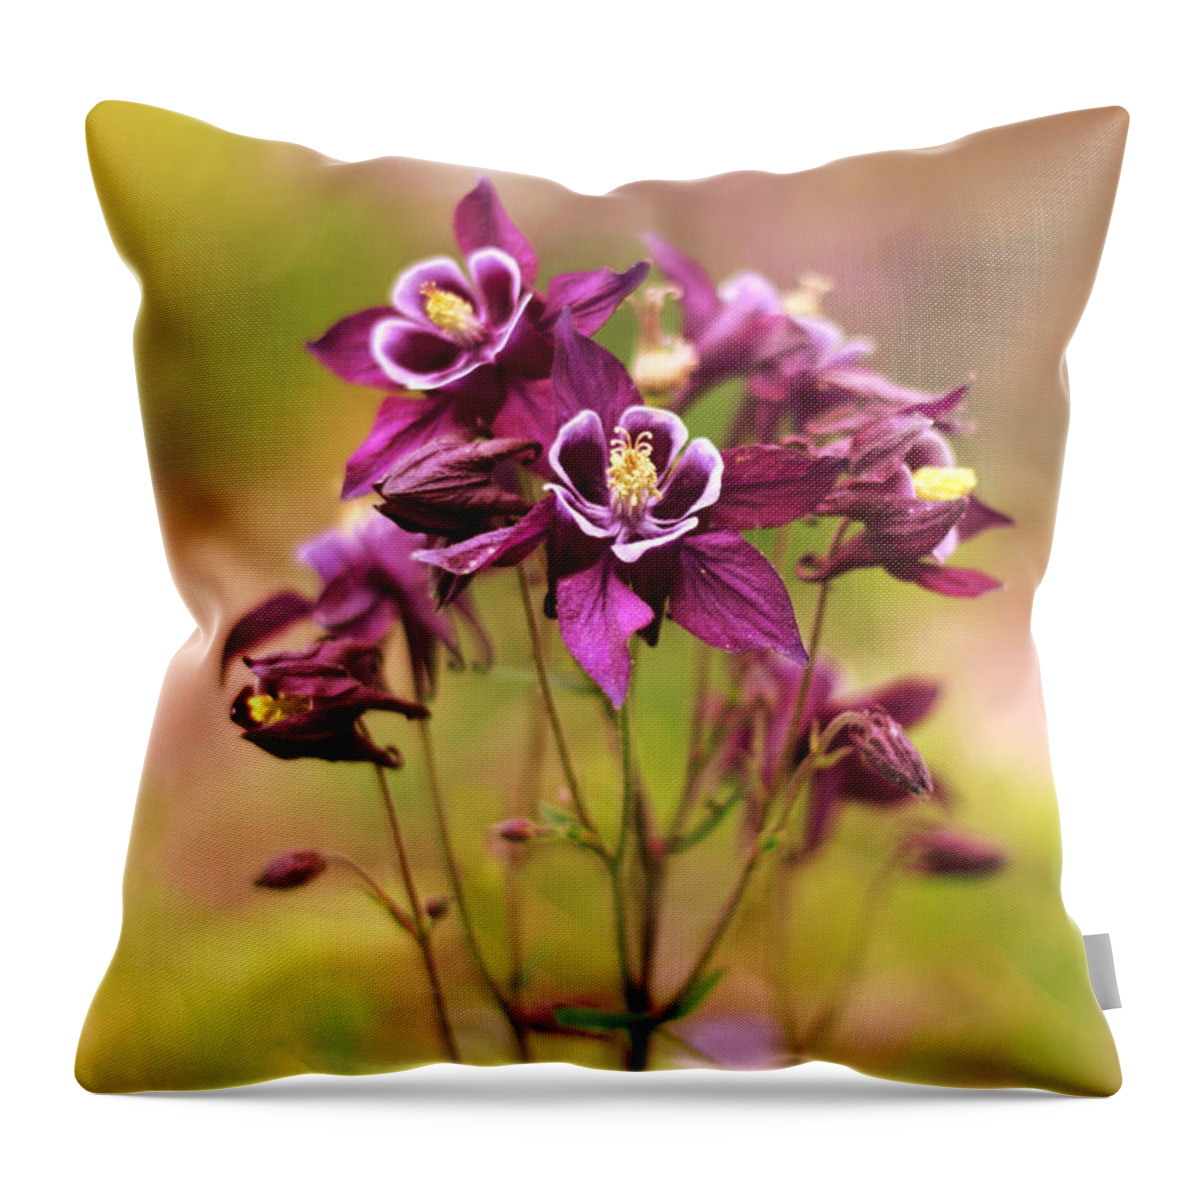 Columbine Throw Pillow featuring the photograph Columbine by Jessica Jenney